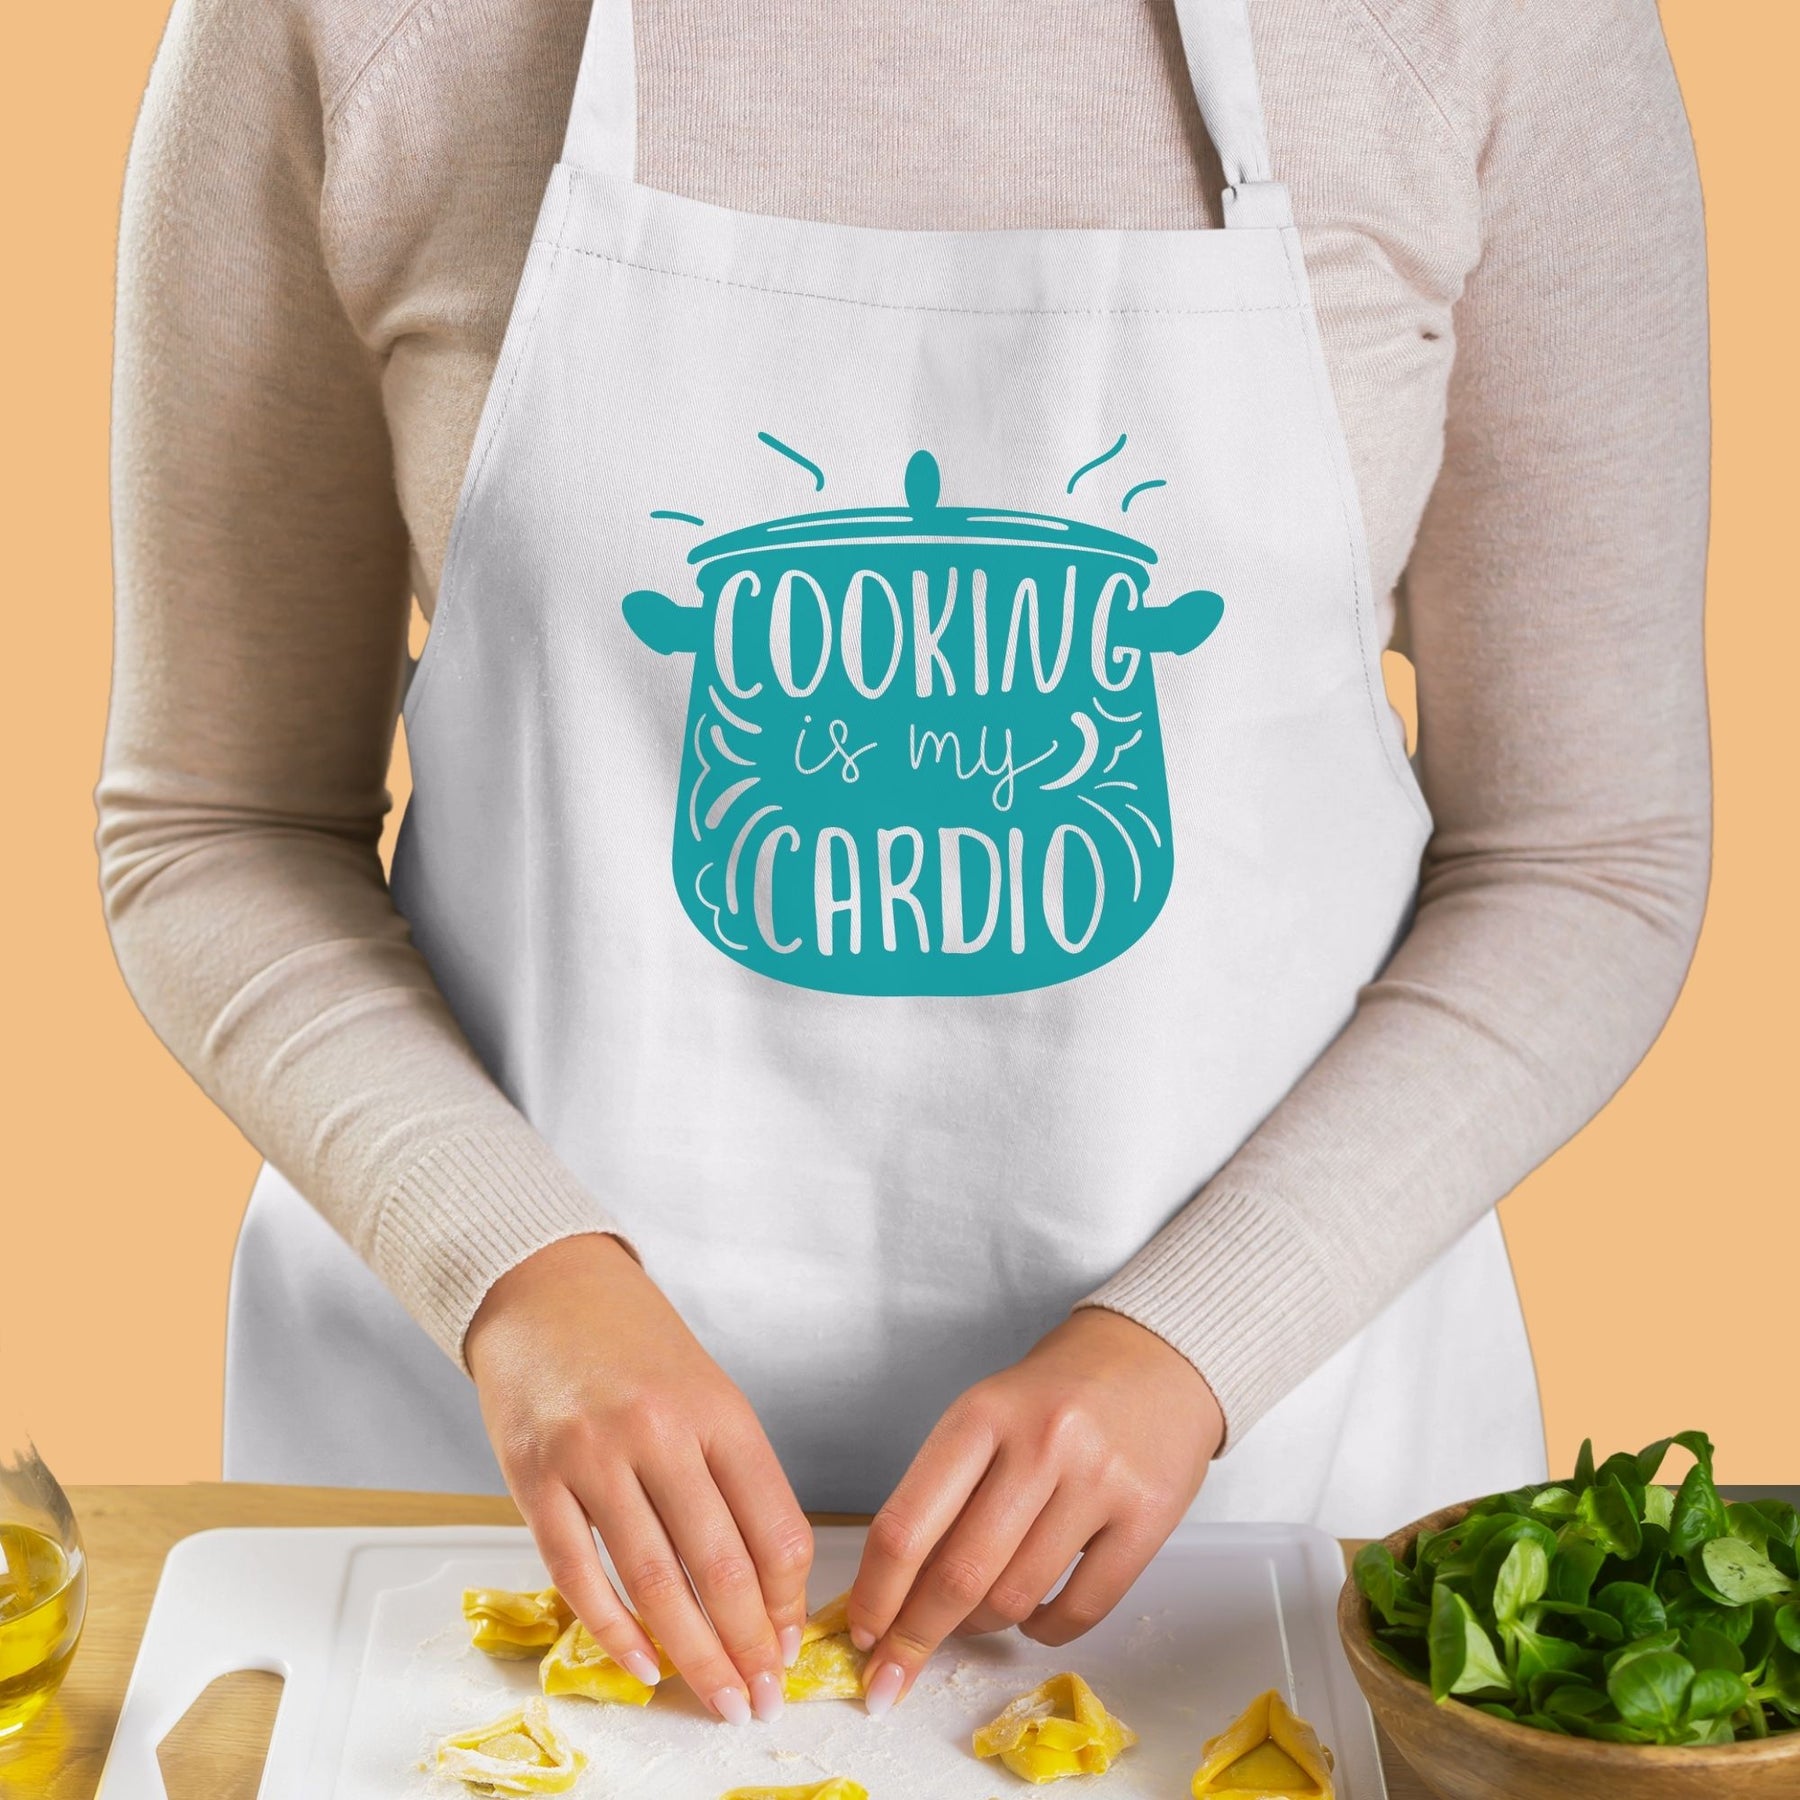 cooking-is-cardio-white-cotton-drill-apron-gogirgit